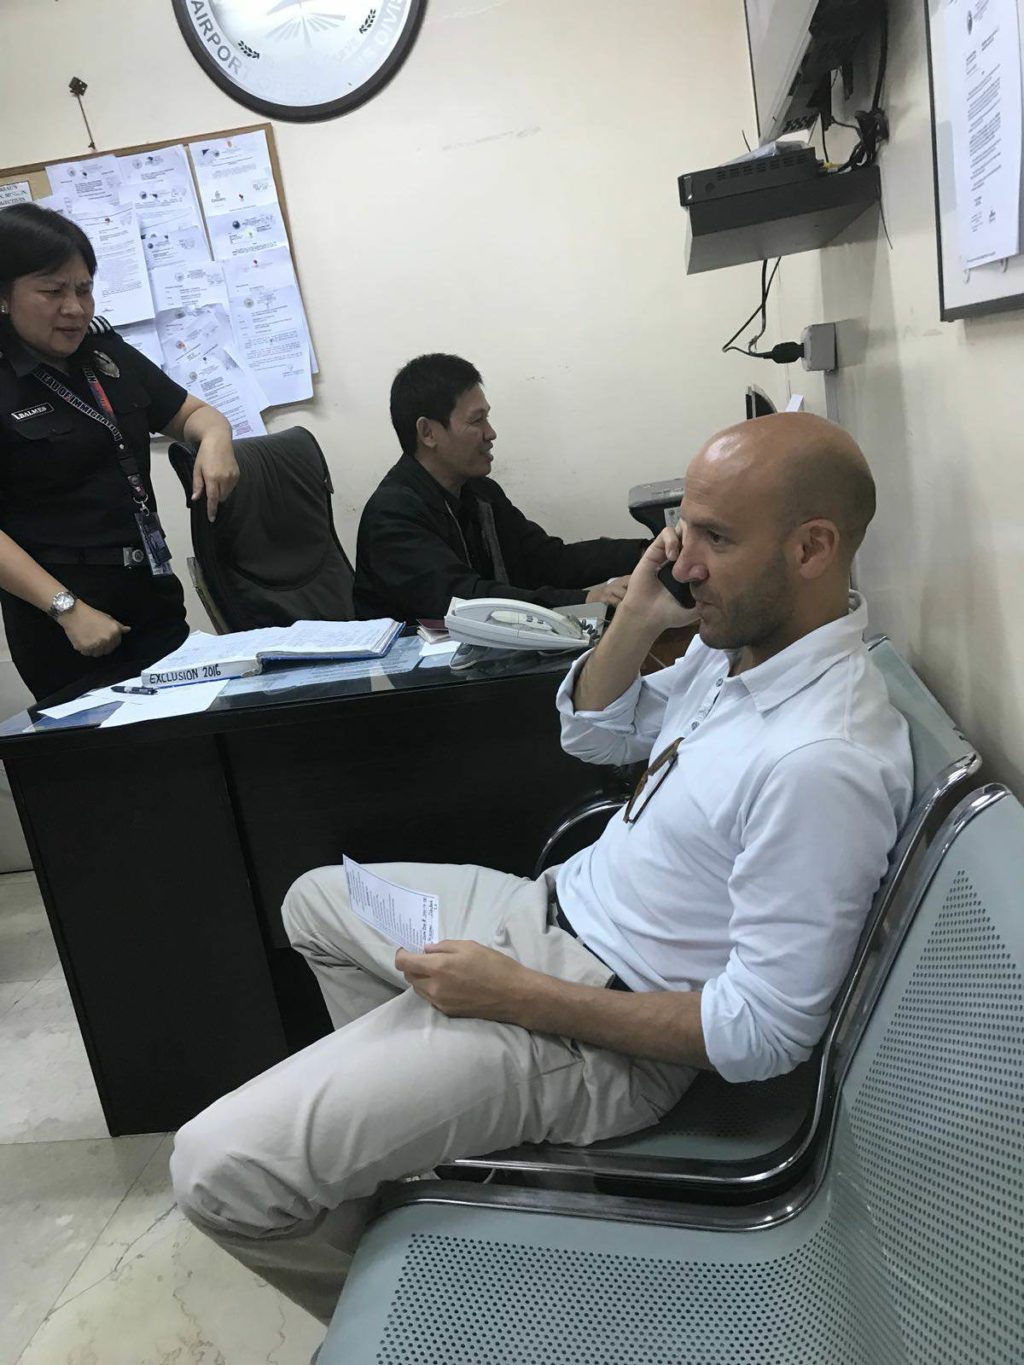 Giacomo Filibeck, deputy secretary-general of the Party of European Socialists, talks to someone on his cellular phone while he was held by immigration officers at the Mactan Cebu International Airport on Sunday. He was subsequently deported for participating in illegal political activities./CONTRIBUTED PHOTO/AKBAYAN